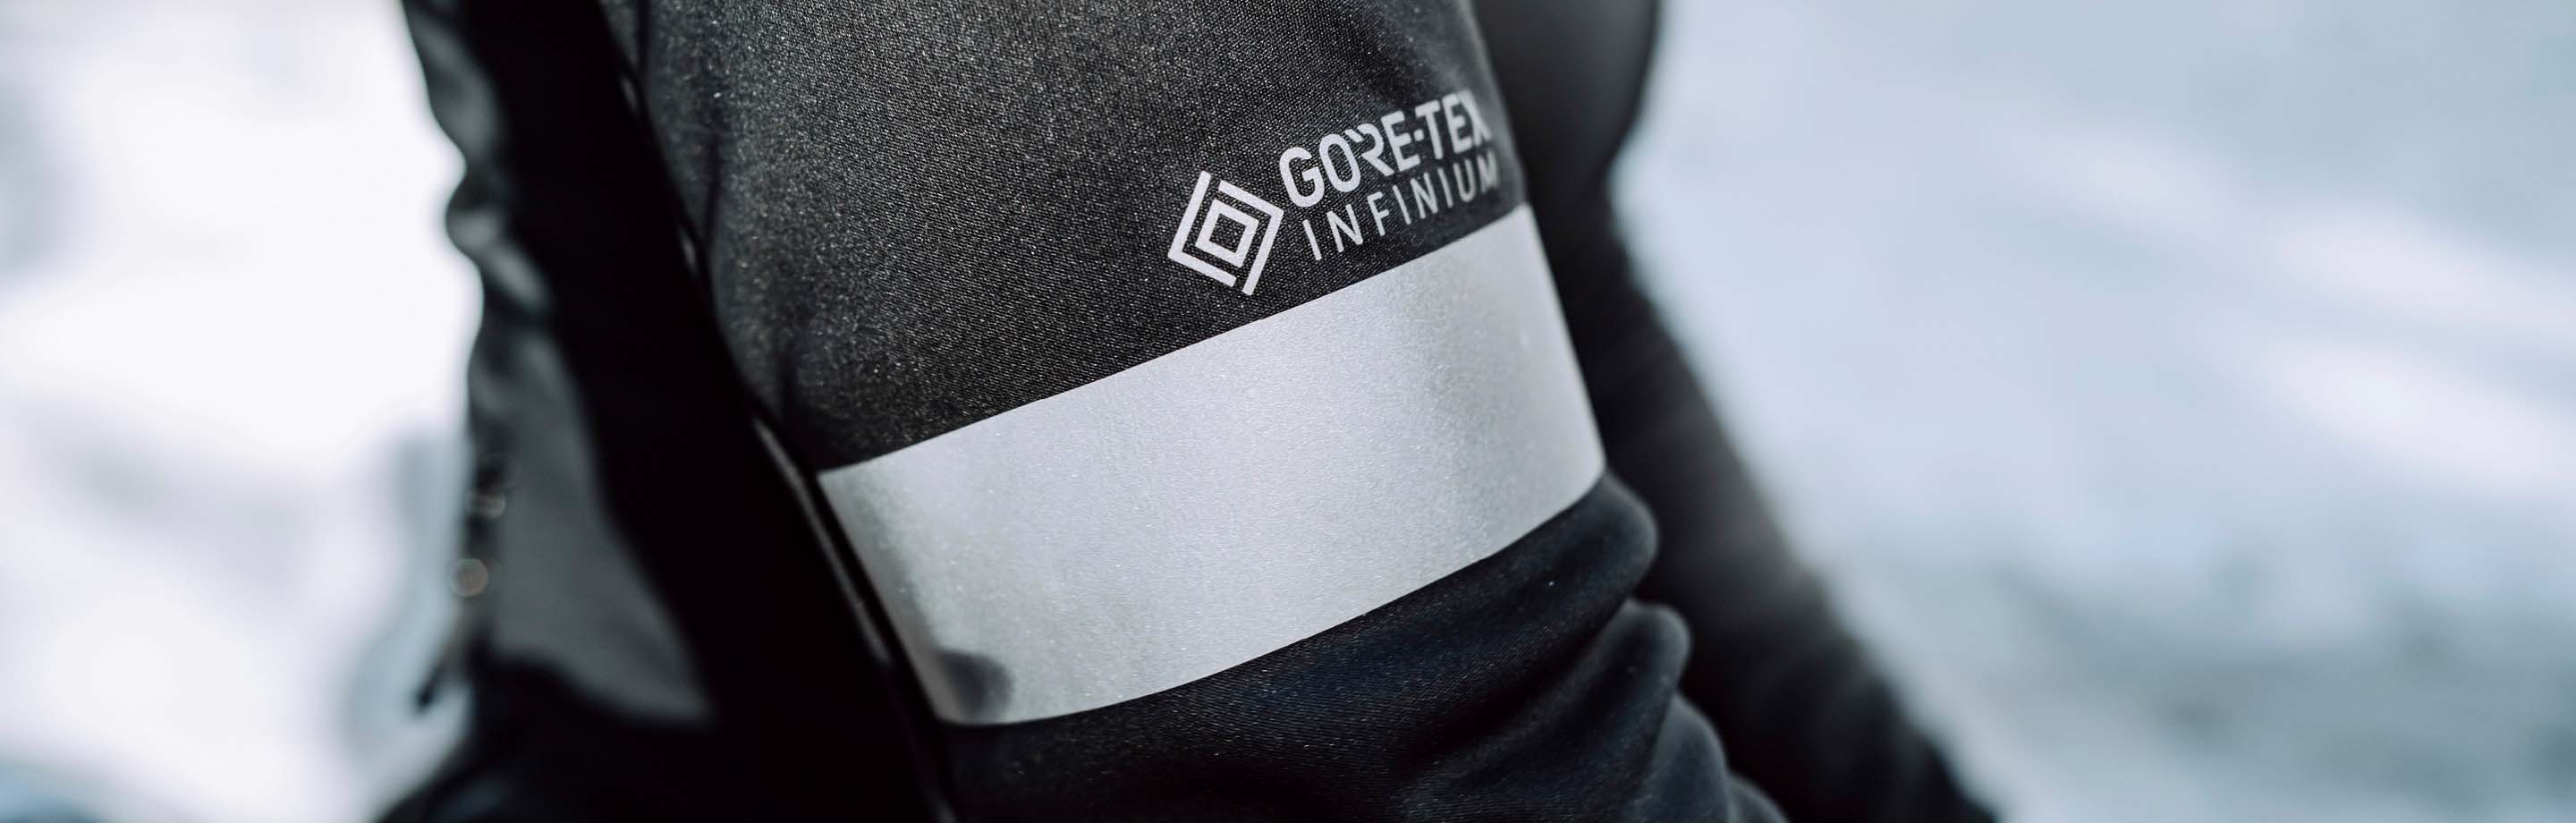 GORE-TEX INFINIUM™ - Functional Bike WEAR for an Active Lifestyle